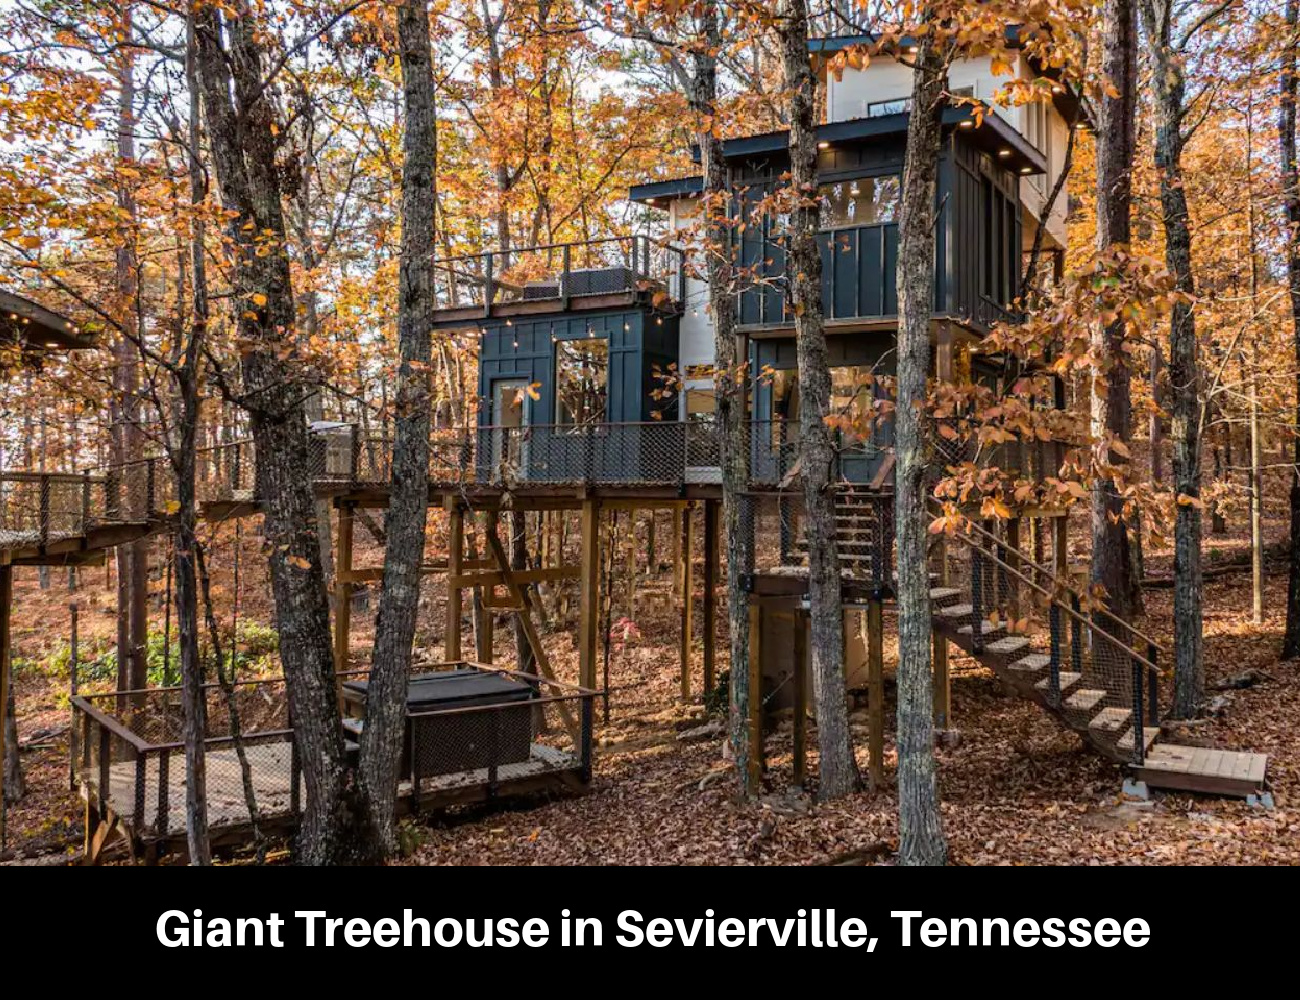 Giant Treehouse in Sevierville, Tennessee